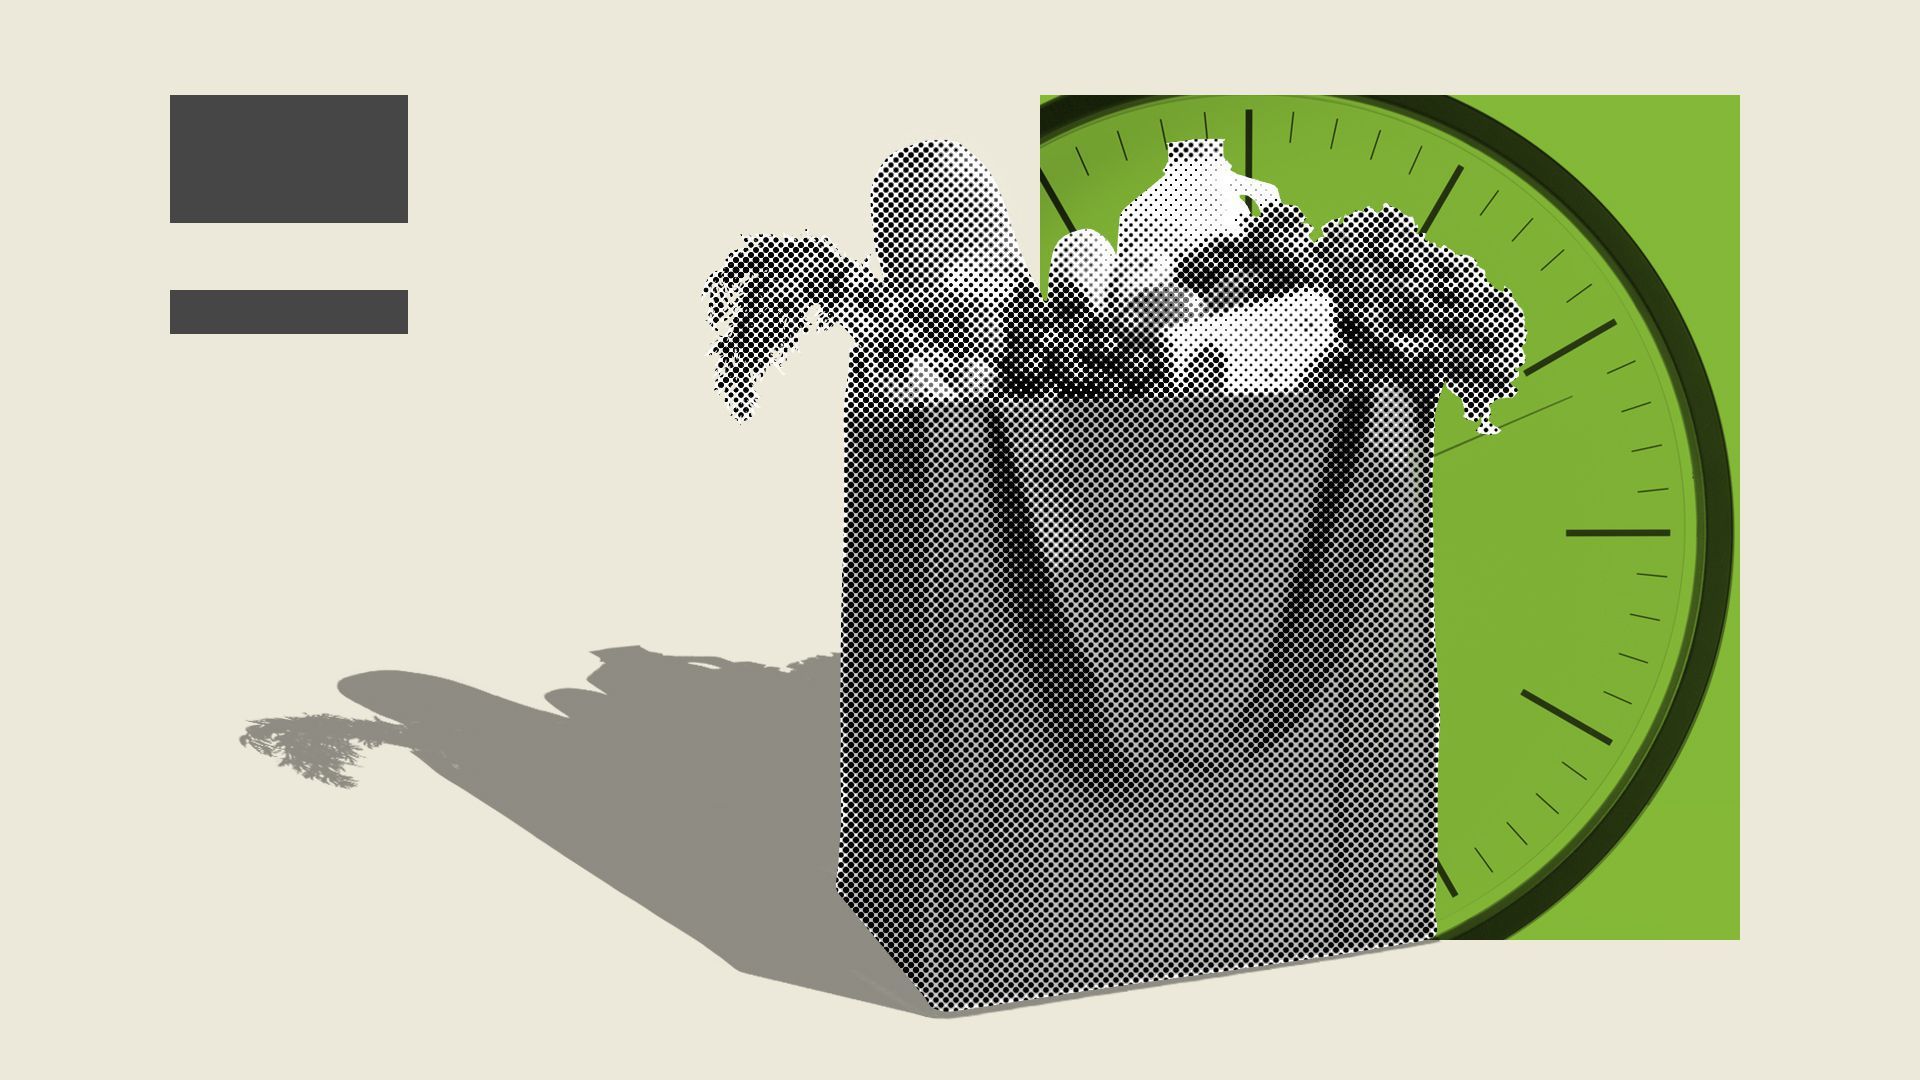 An illustration of a grocery bag.